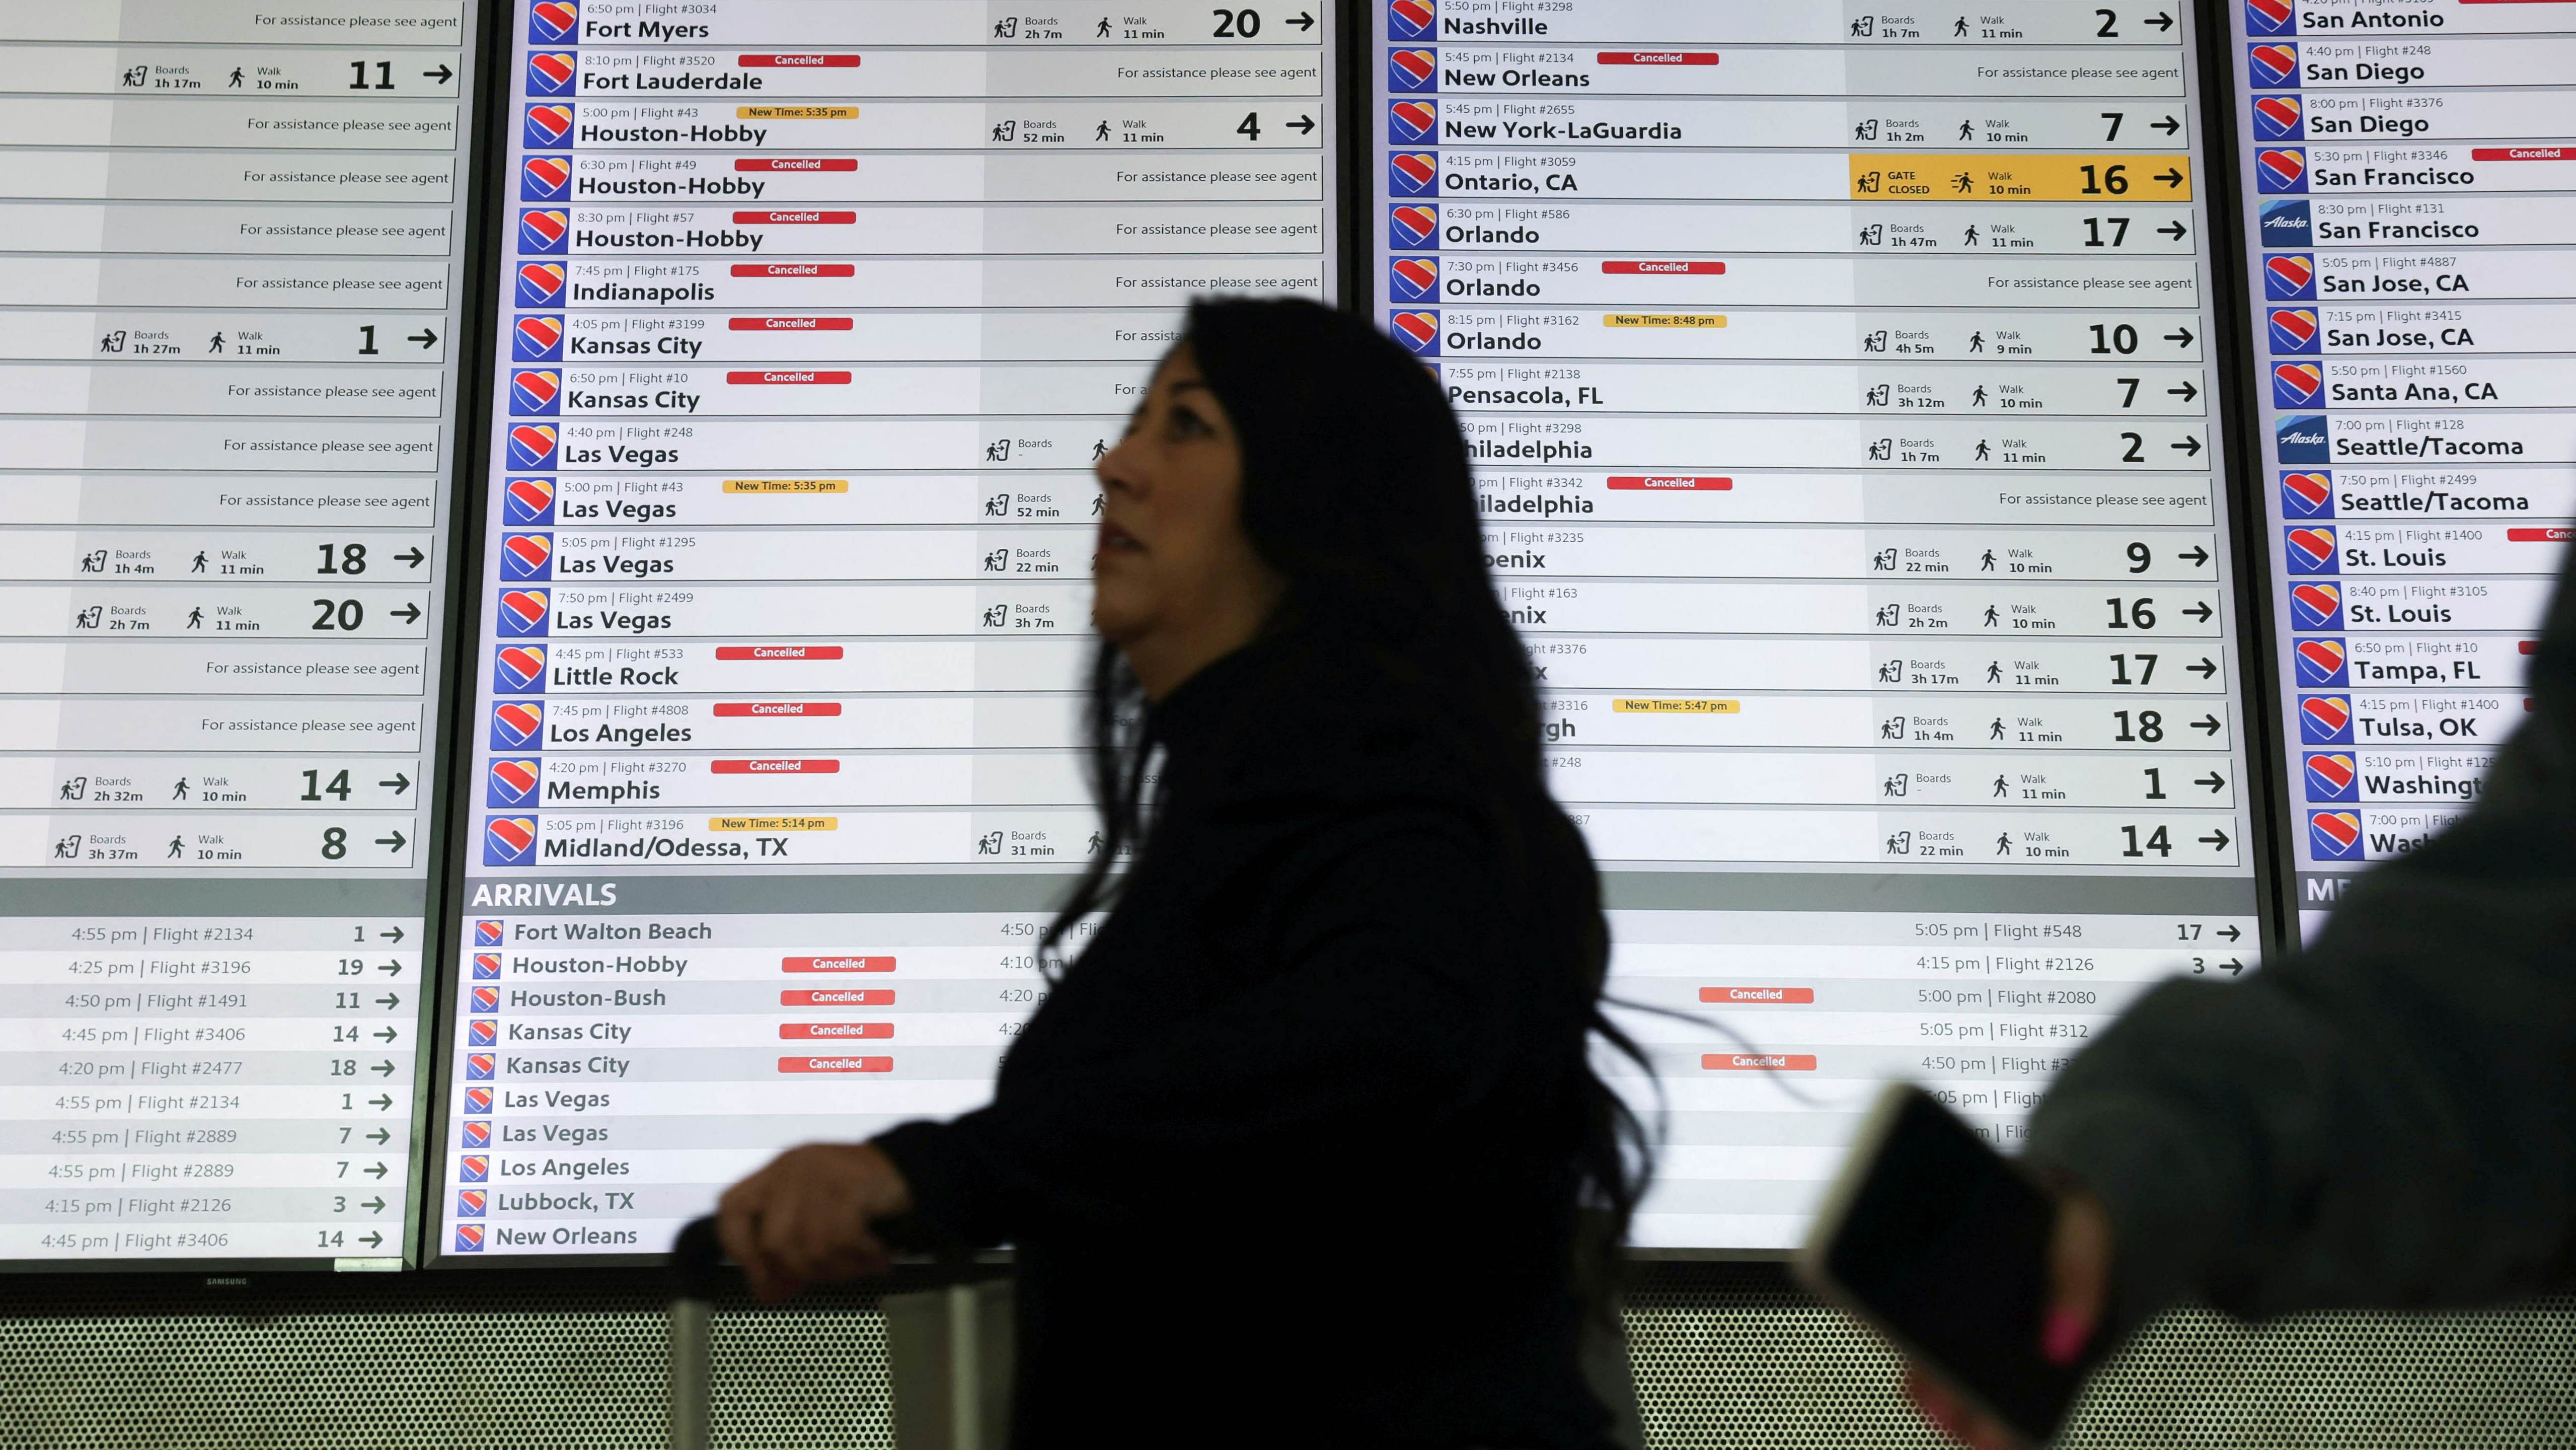 Another kind of crisis was playing out at US airports around the country, as Southwest Airlines was forced to cancel thousands more flights to try to recover from a spiraling logistics breakdown.Credit: Reuters Photo